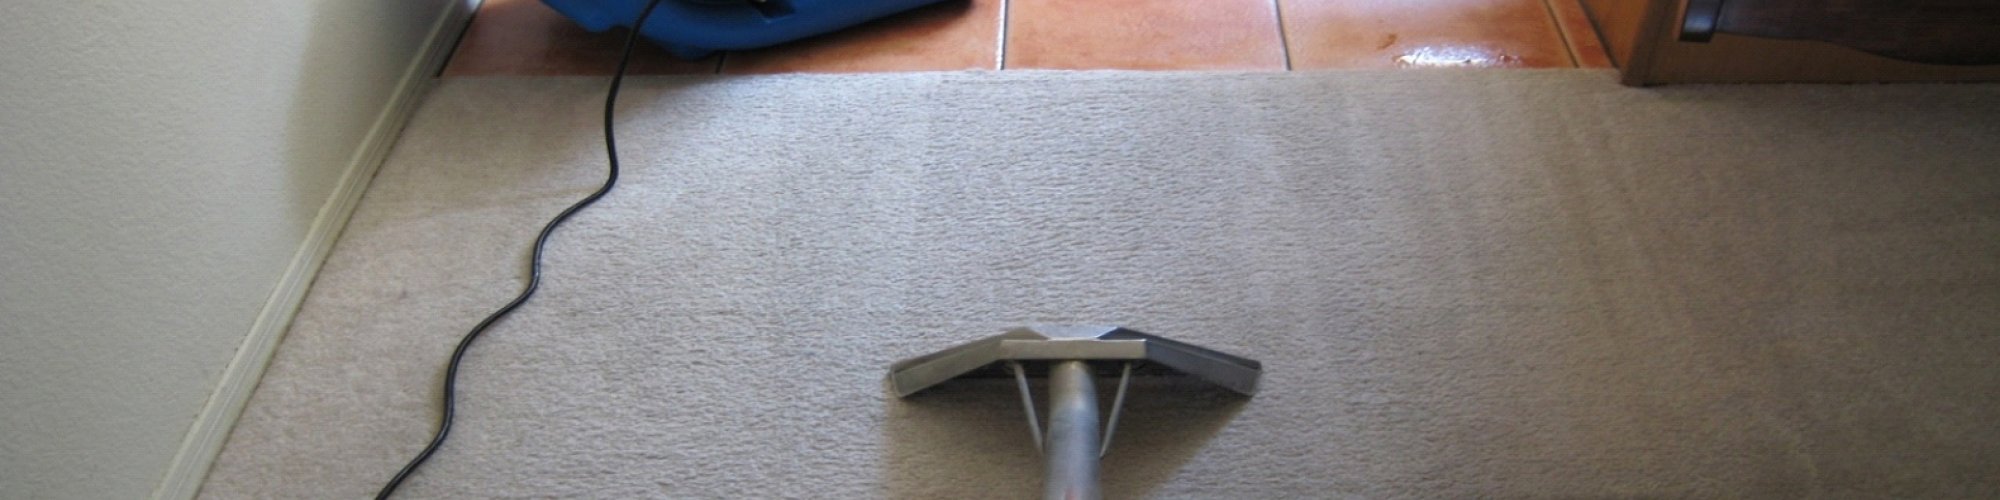 Carpet Cleaning Wollongong